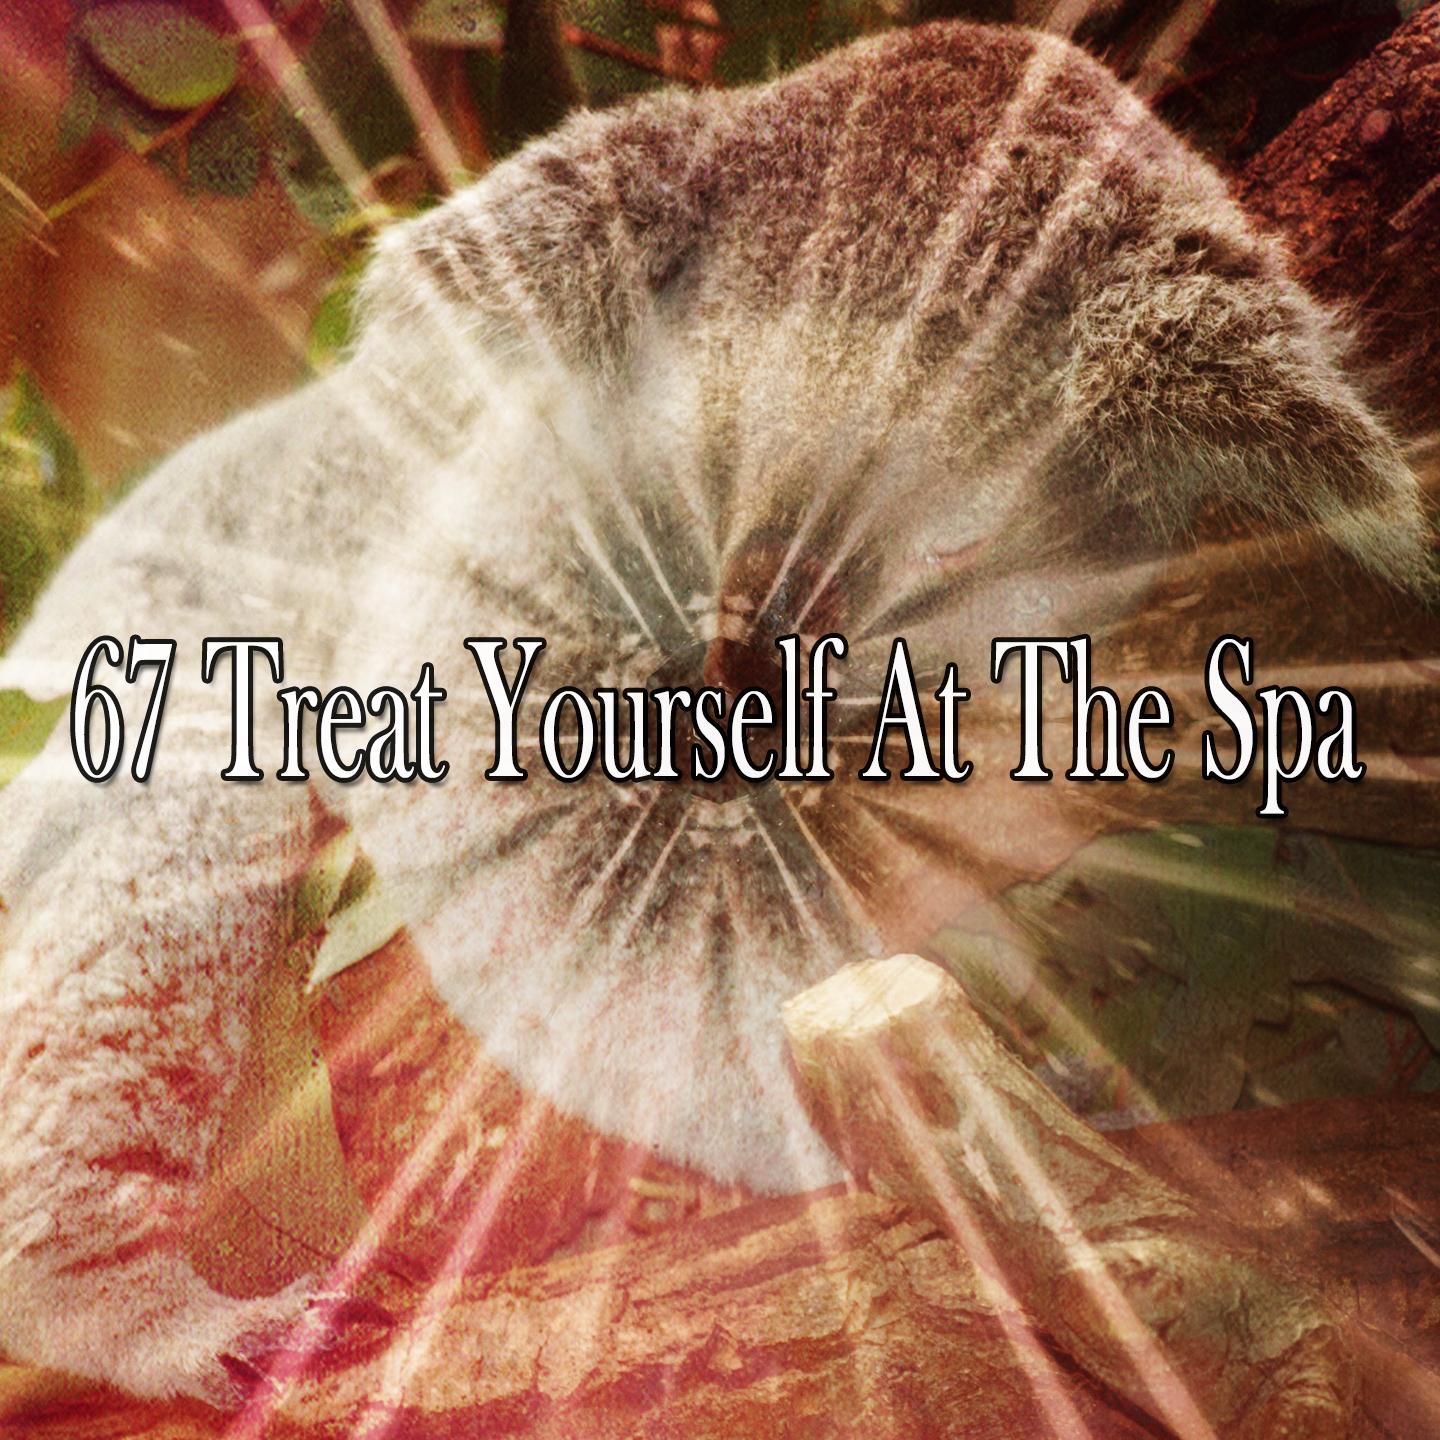 67 Treat Yourself at the Spa